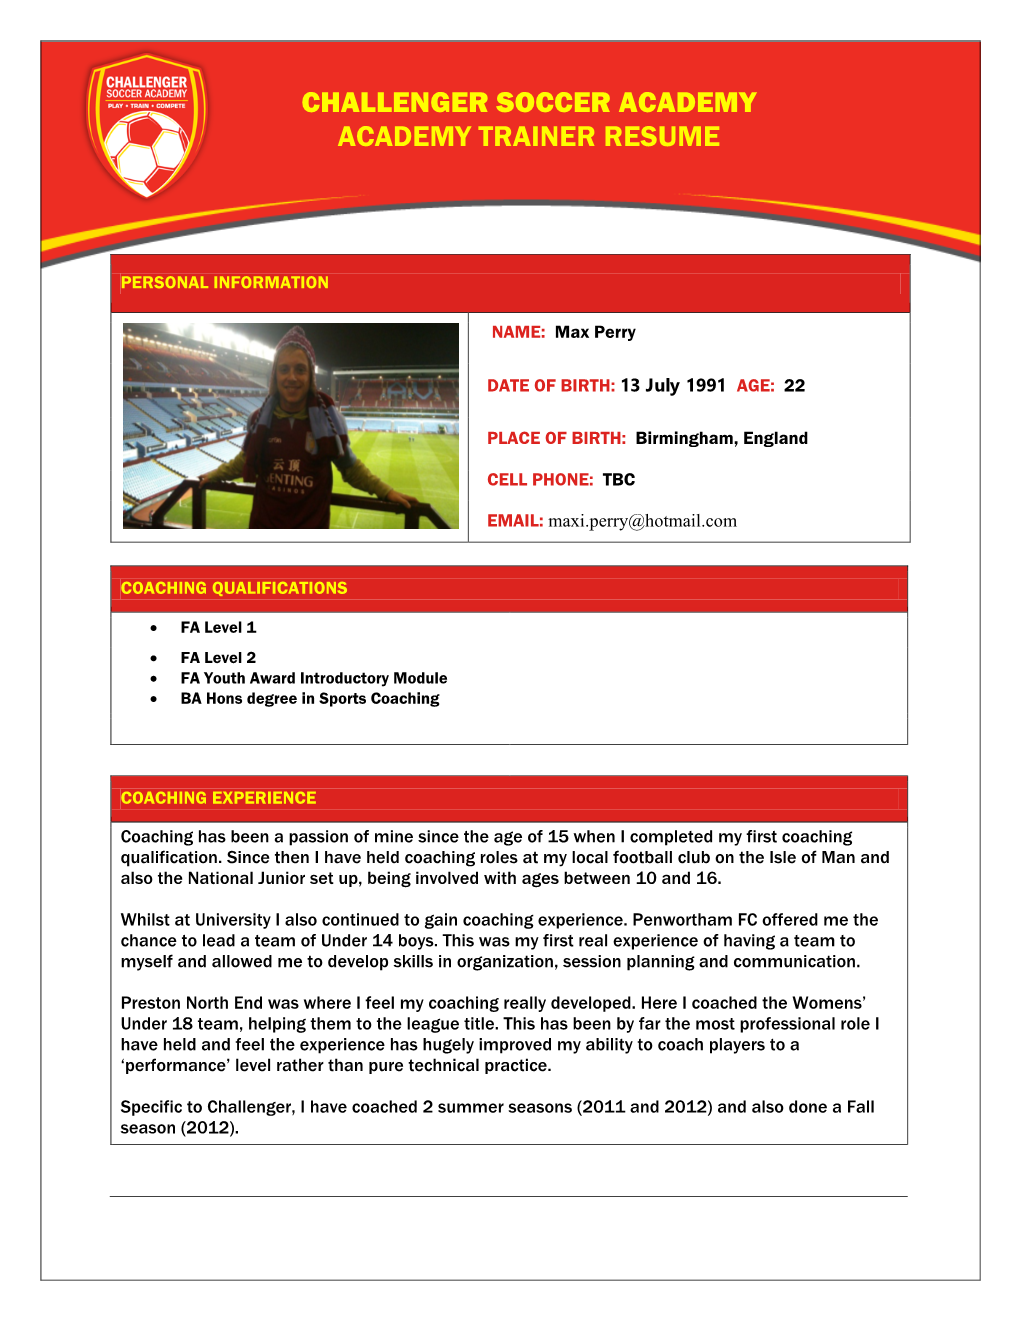 Challenger Soccer Academy Academy Trainer Resume